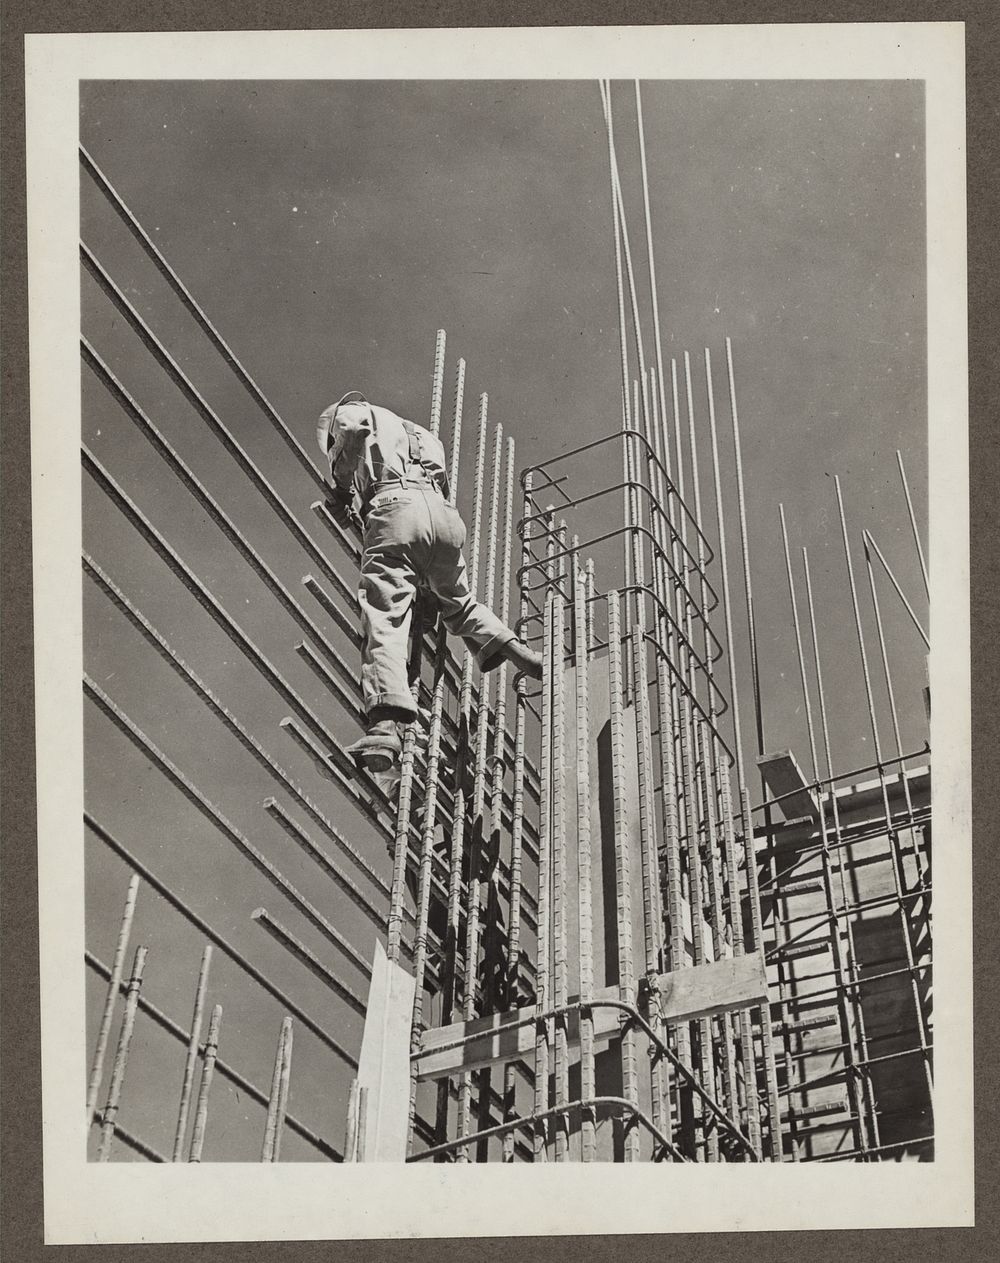 Grand Coulee Dam, Columbia Basin Reclamation Project, Wash. A steel worker working on a section of the Grand Coulee dam east…